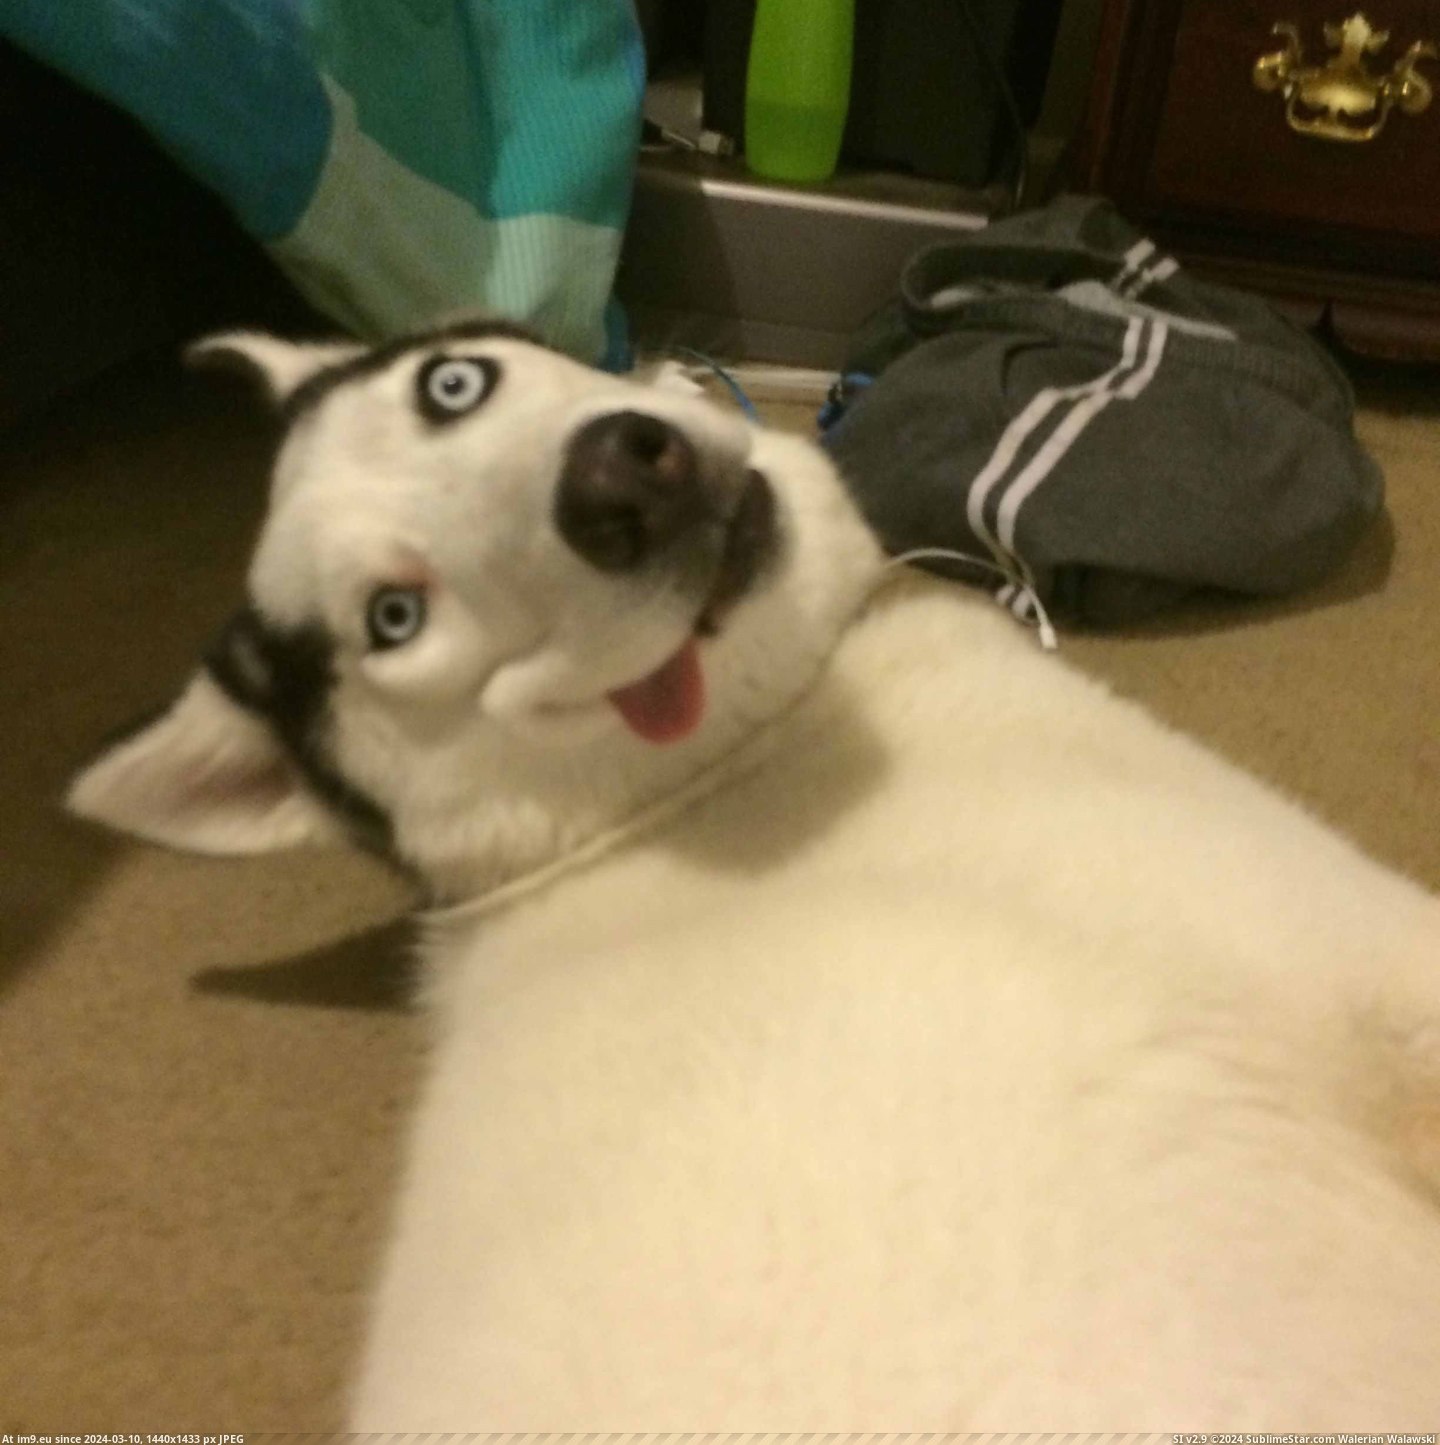 #Full #Farted #Derp [Aww] You never go full derp!...or do you? Or maybe he just farted?? Pic. (Изображение из альбом My r/AWW favs))